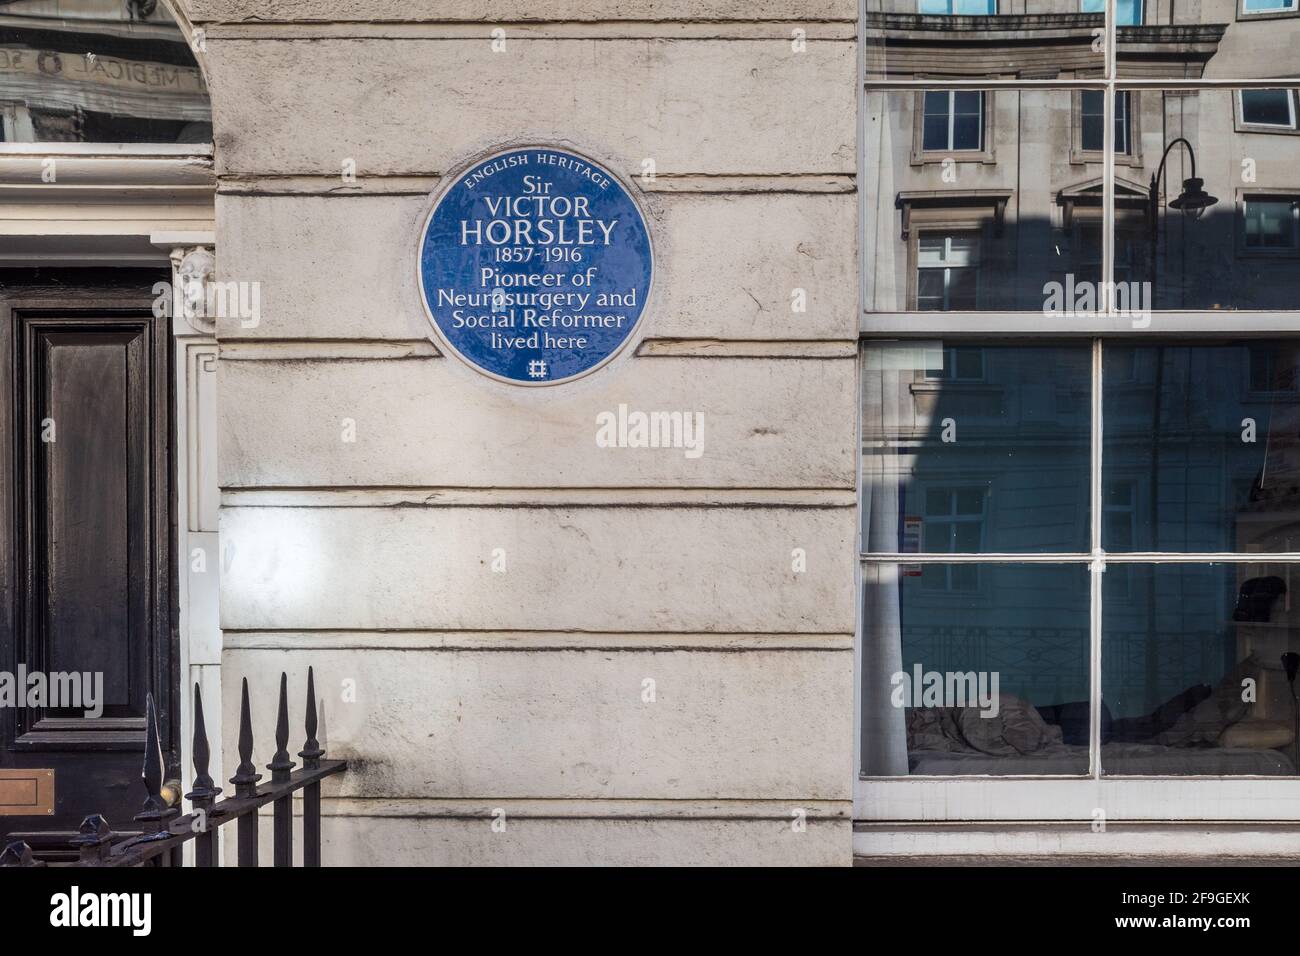 Sir Victor Horsley English Heritage Blue Plaque, Sir Victor Horsley (1857-1916) was a pioneering neurosurgeon & social reformer - 129 Gower St London. Stock Photo